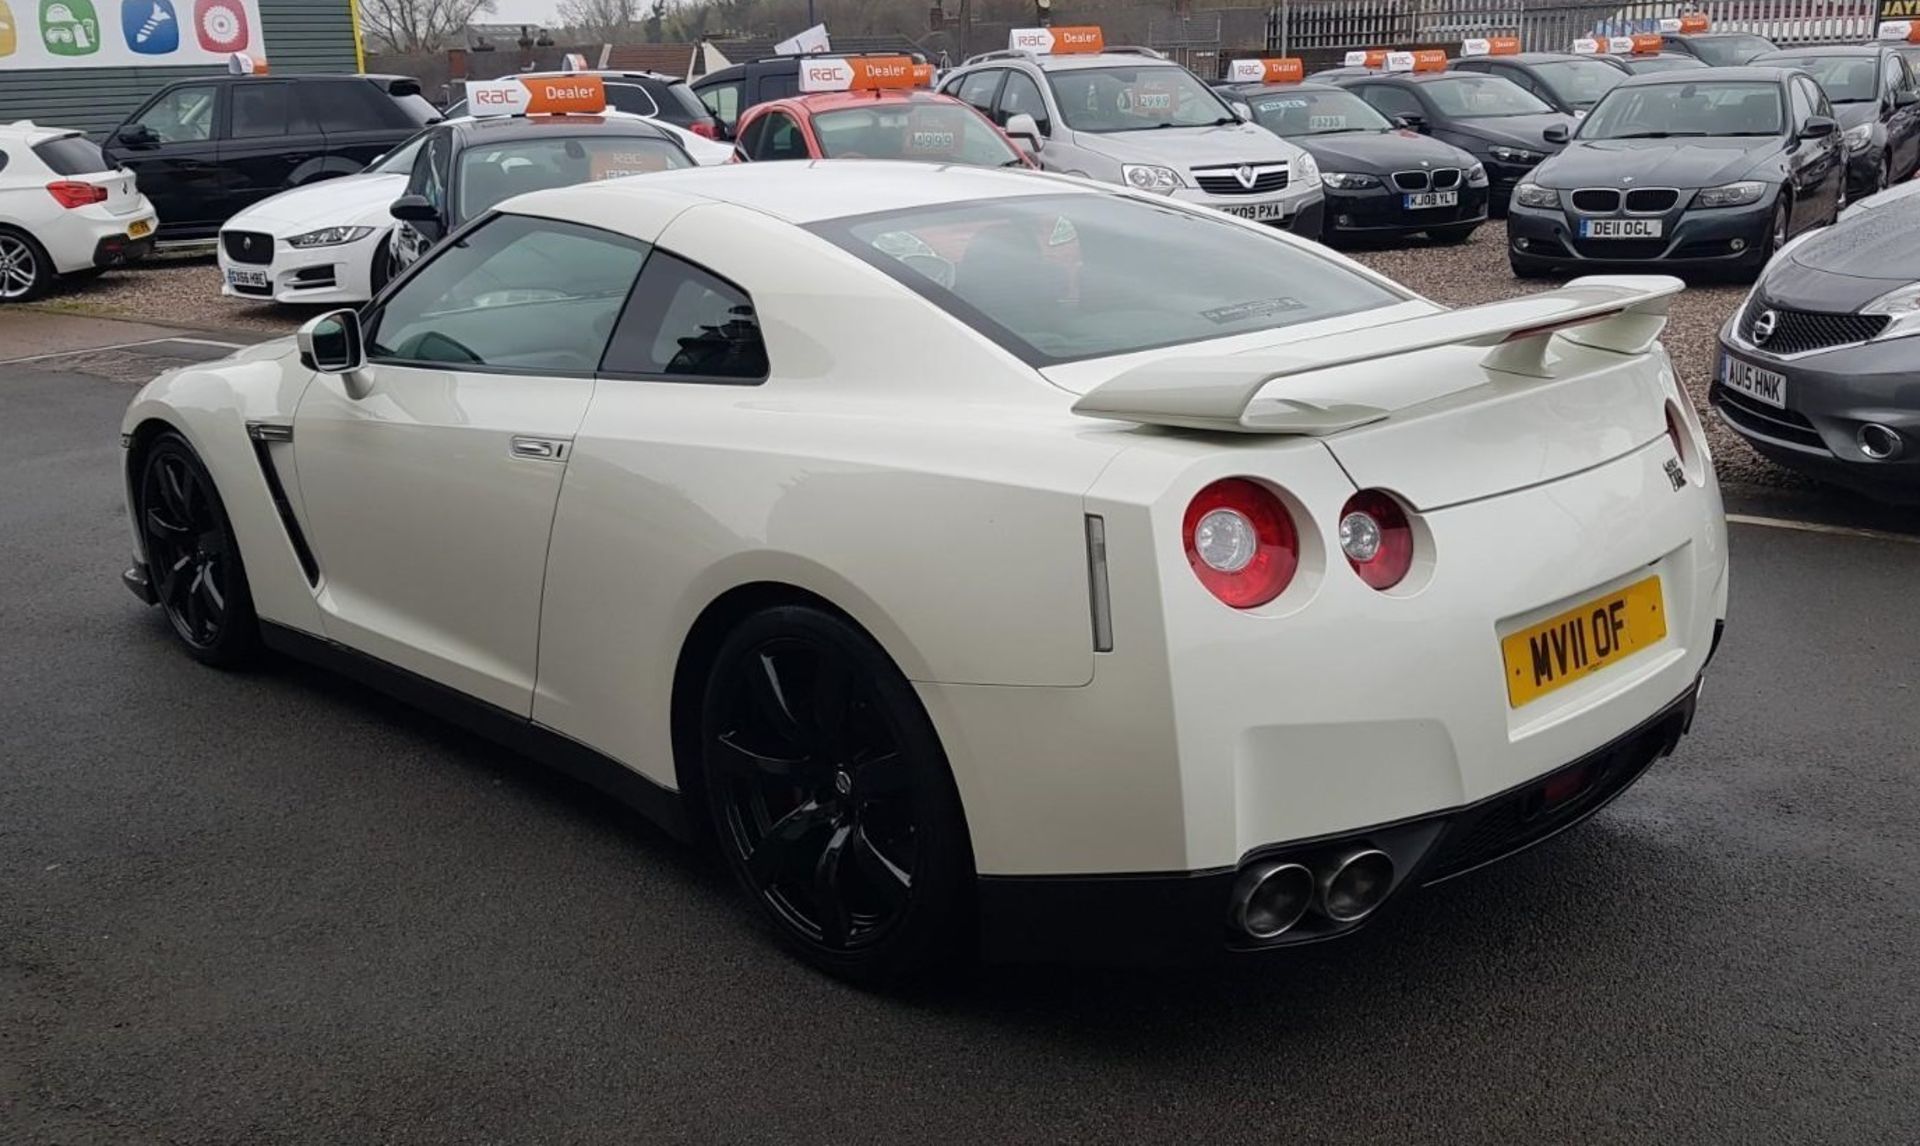 2011 NISSAN GT-R R35 750 stage 5 PREMIUM EDITION S-A 1 OWNER FROM NEW 20K MILES WARRANTED! - Image 4 of 7